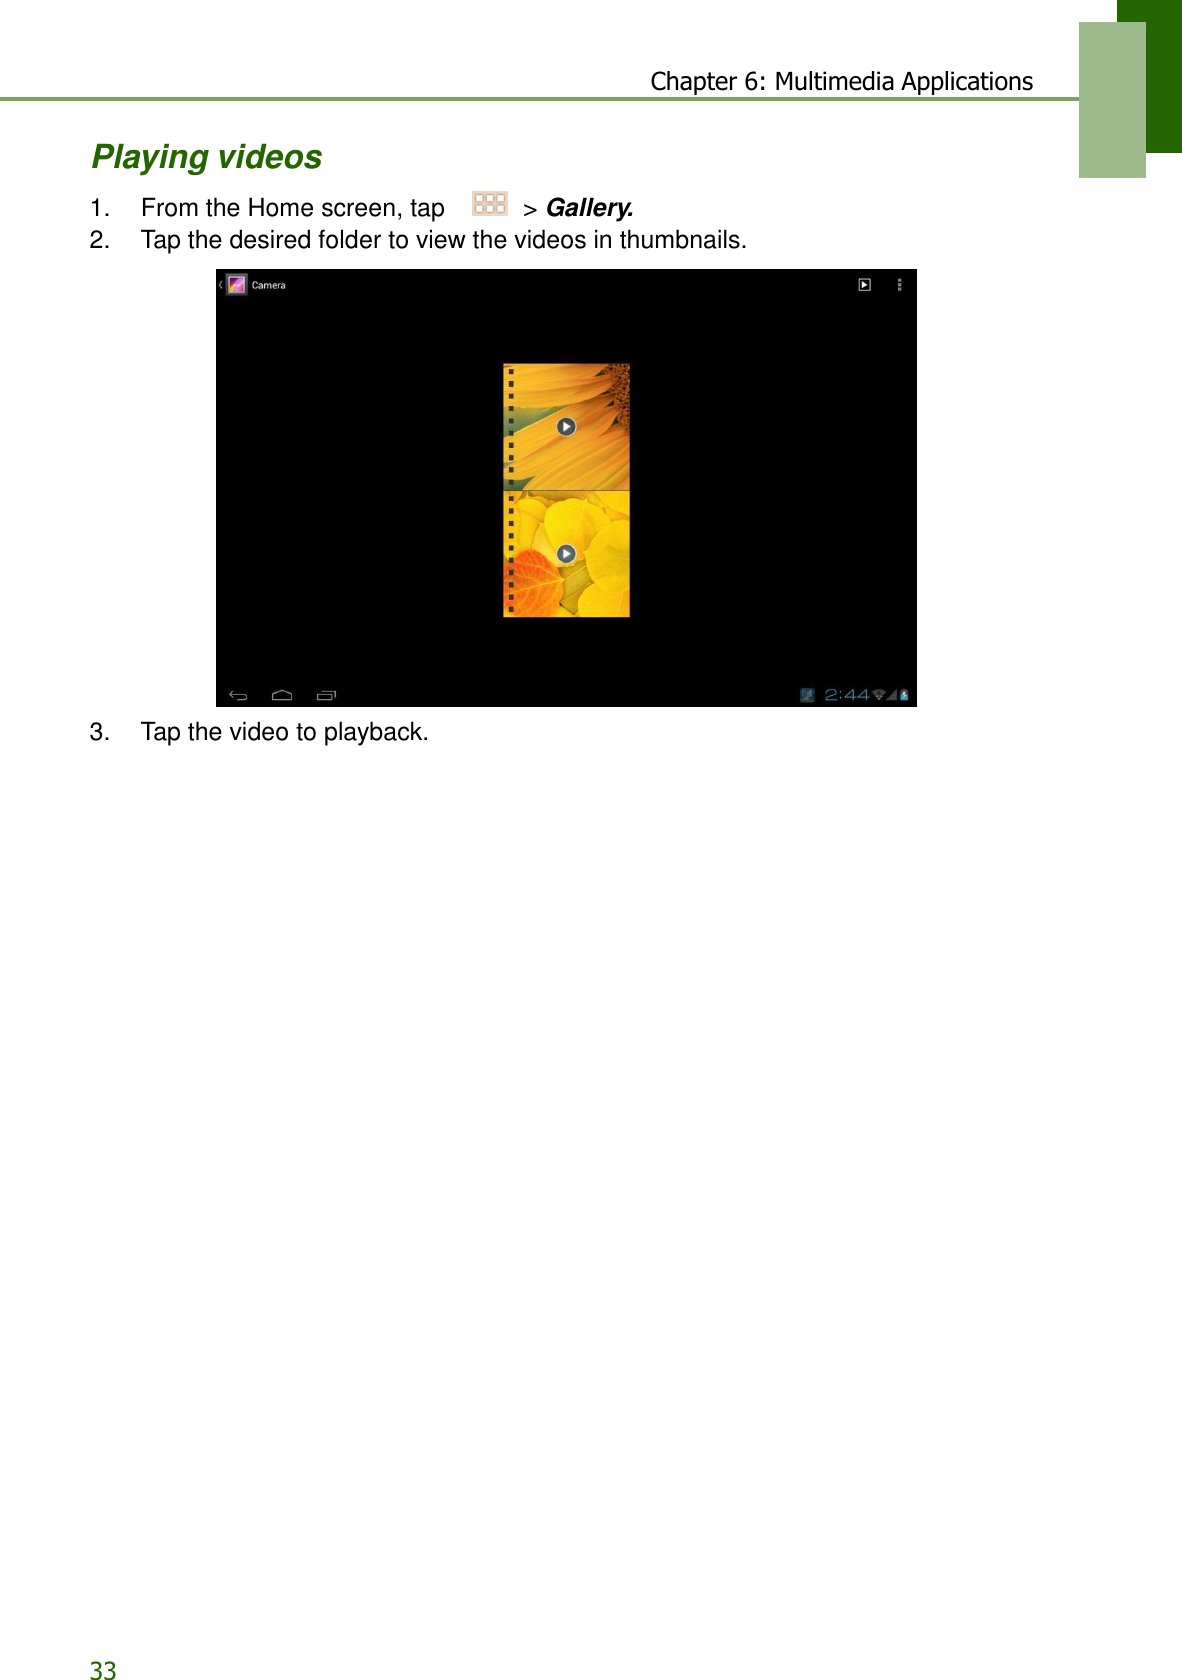 33 Chapter 6: Multimedia Applications   Playing videos  1.    From the Home screen, tap     &gt; Gallery. 2.    Tap the desired folder to view the videos in thumbnails.    3.    Tap the video to playback. 